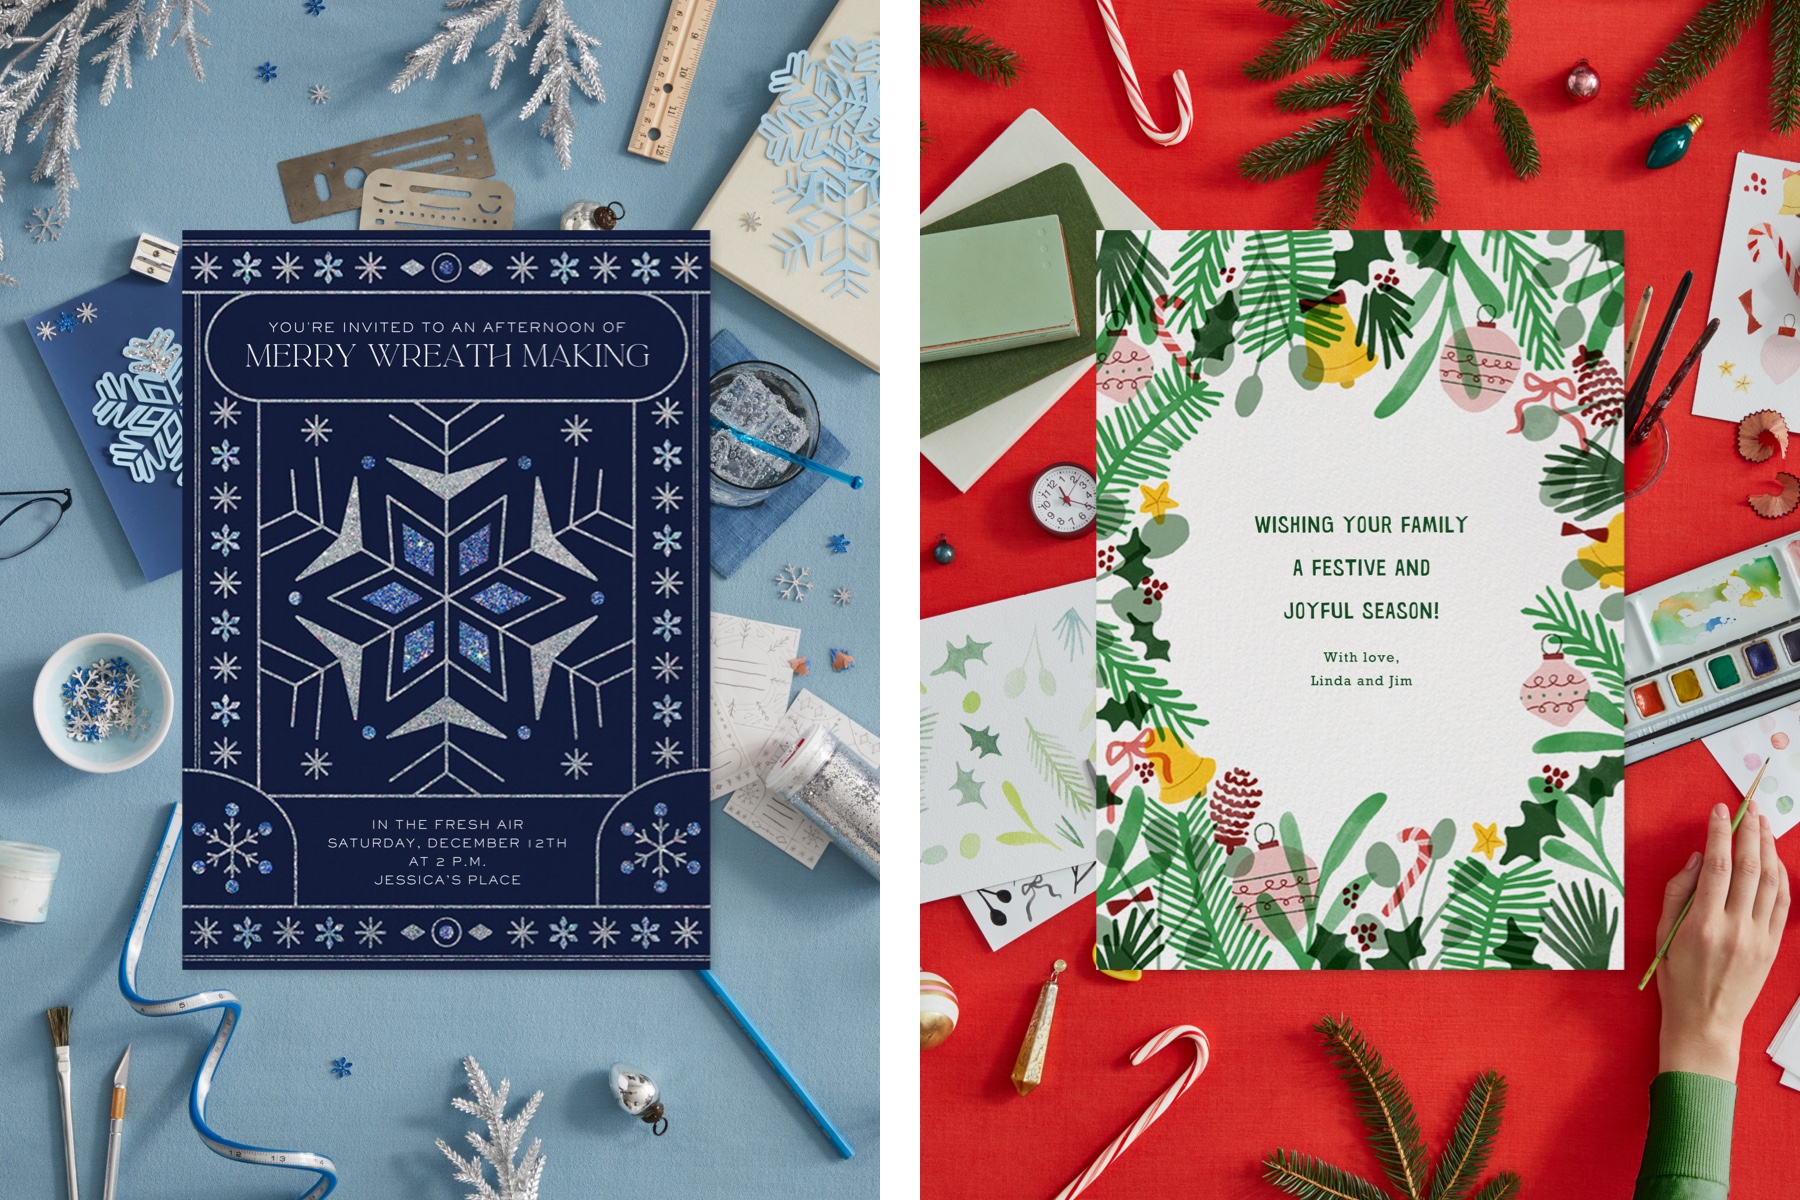 Two digital invitations surrounded by objects of inspiration, like paint, candy canes, glitter, and more.